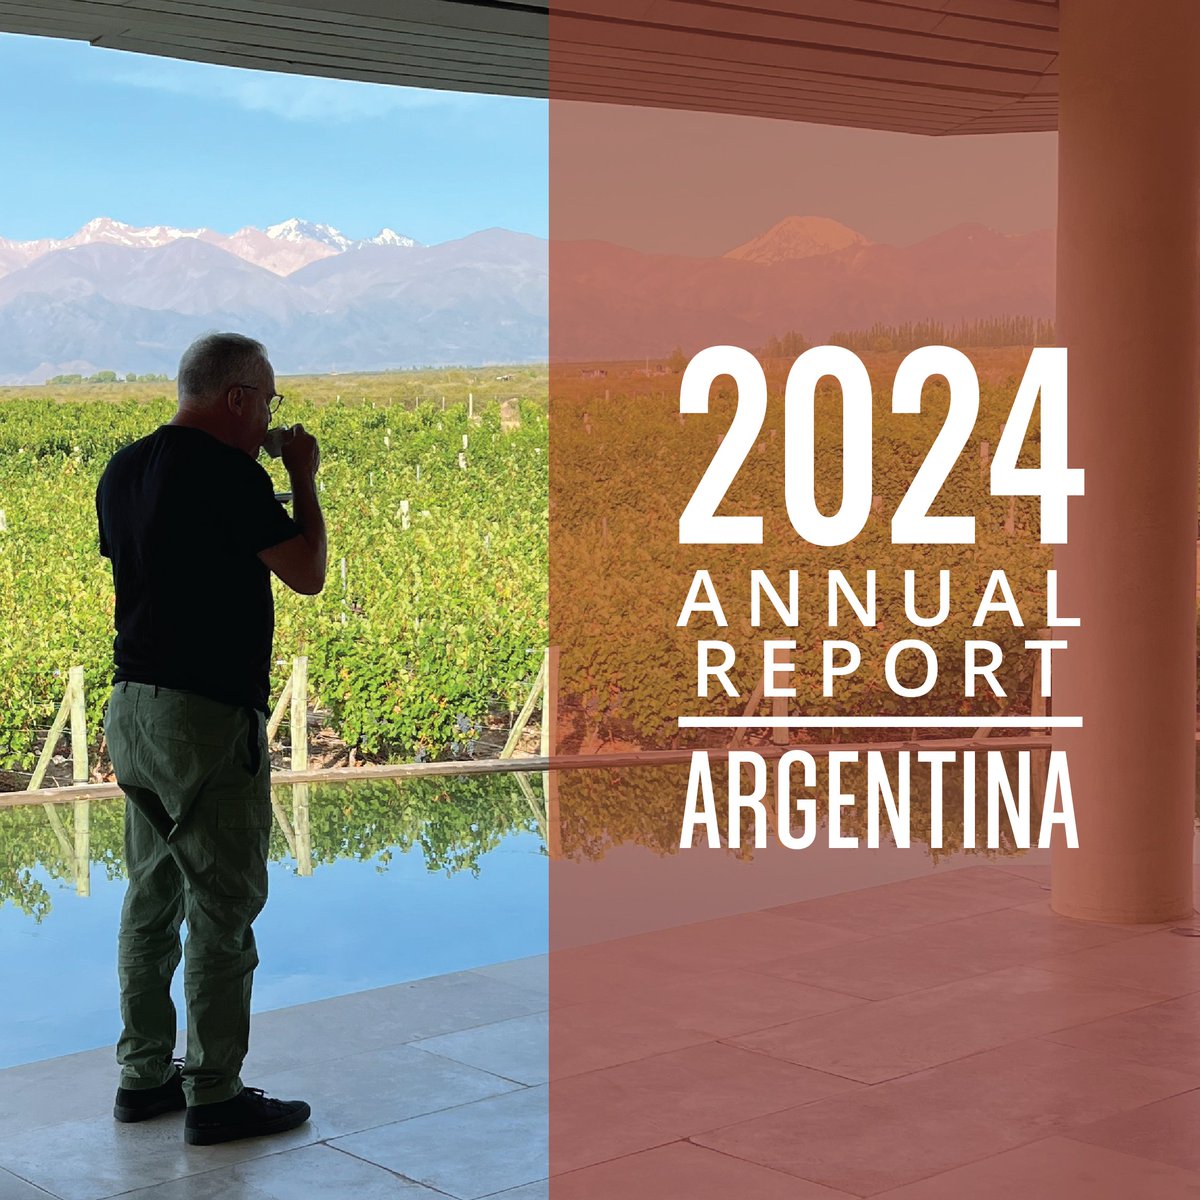 Our Argentina Annual Report has over 2,200 wine ratings. It highlights how Argentine winemakers are moving towards wines more focused on drinkability, harmony and true terroir representation, creating bottles that are more balanced in character. Read more: jamessuckling.com/wine-tasting-r…